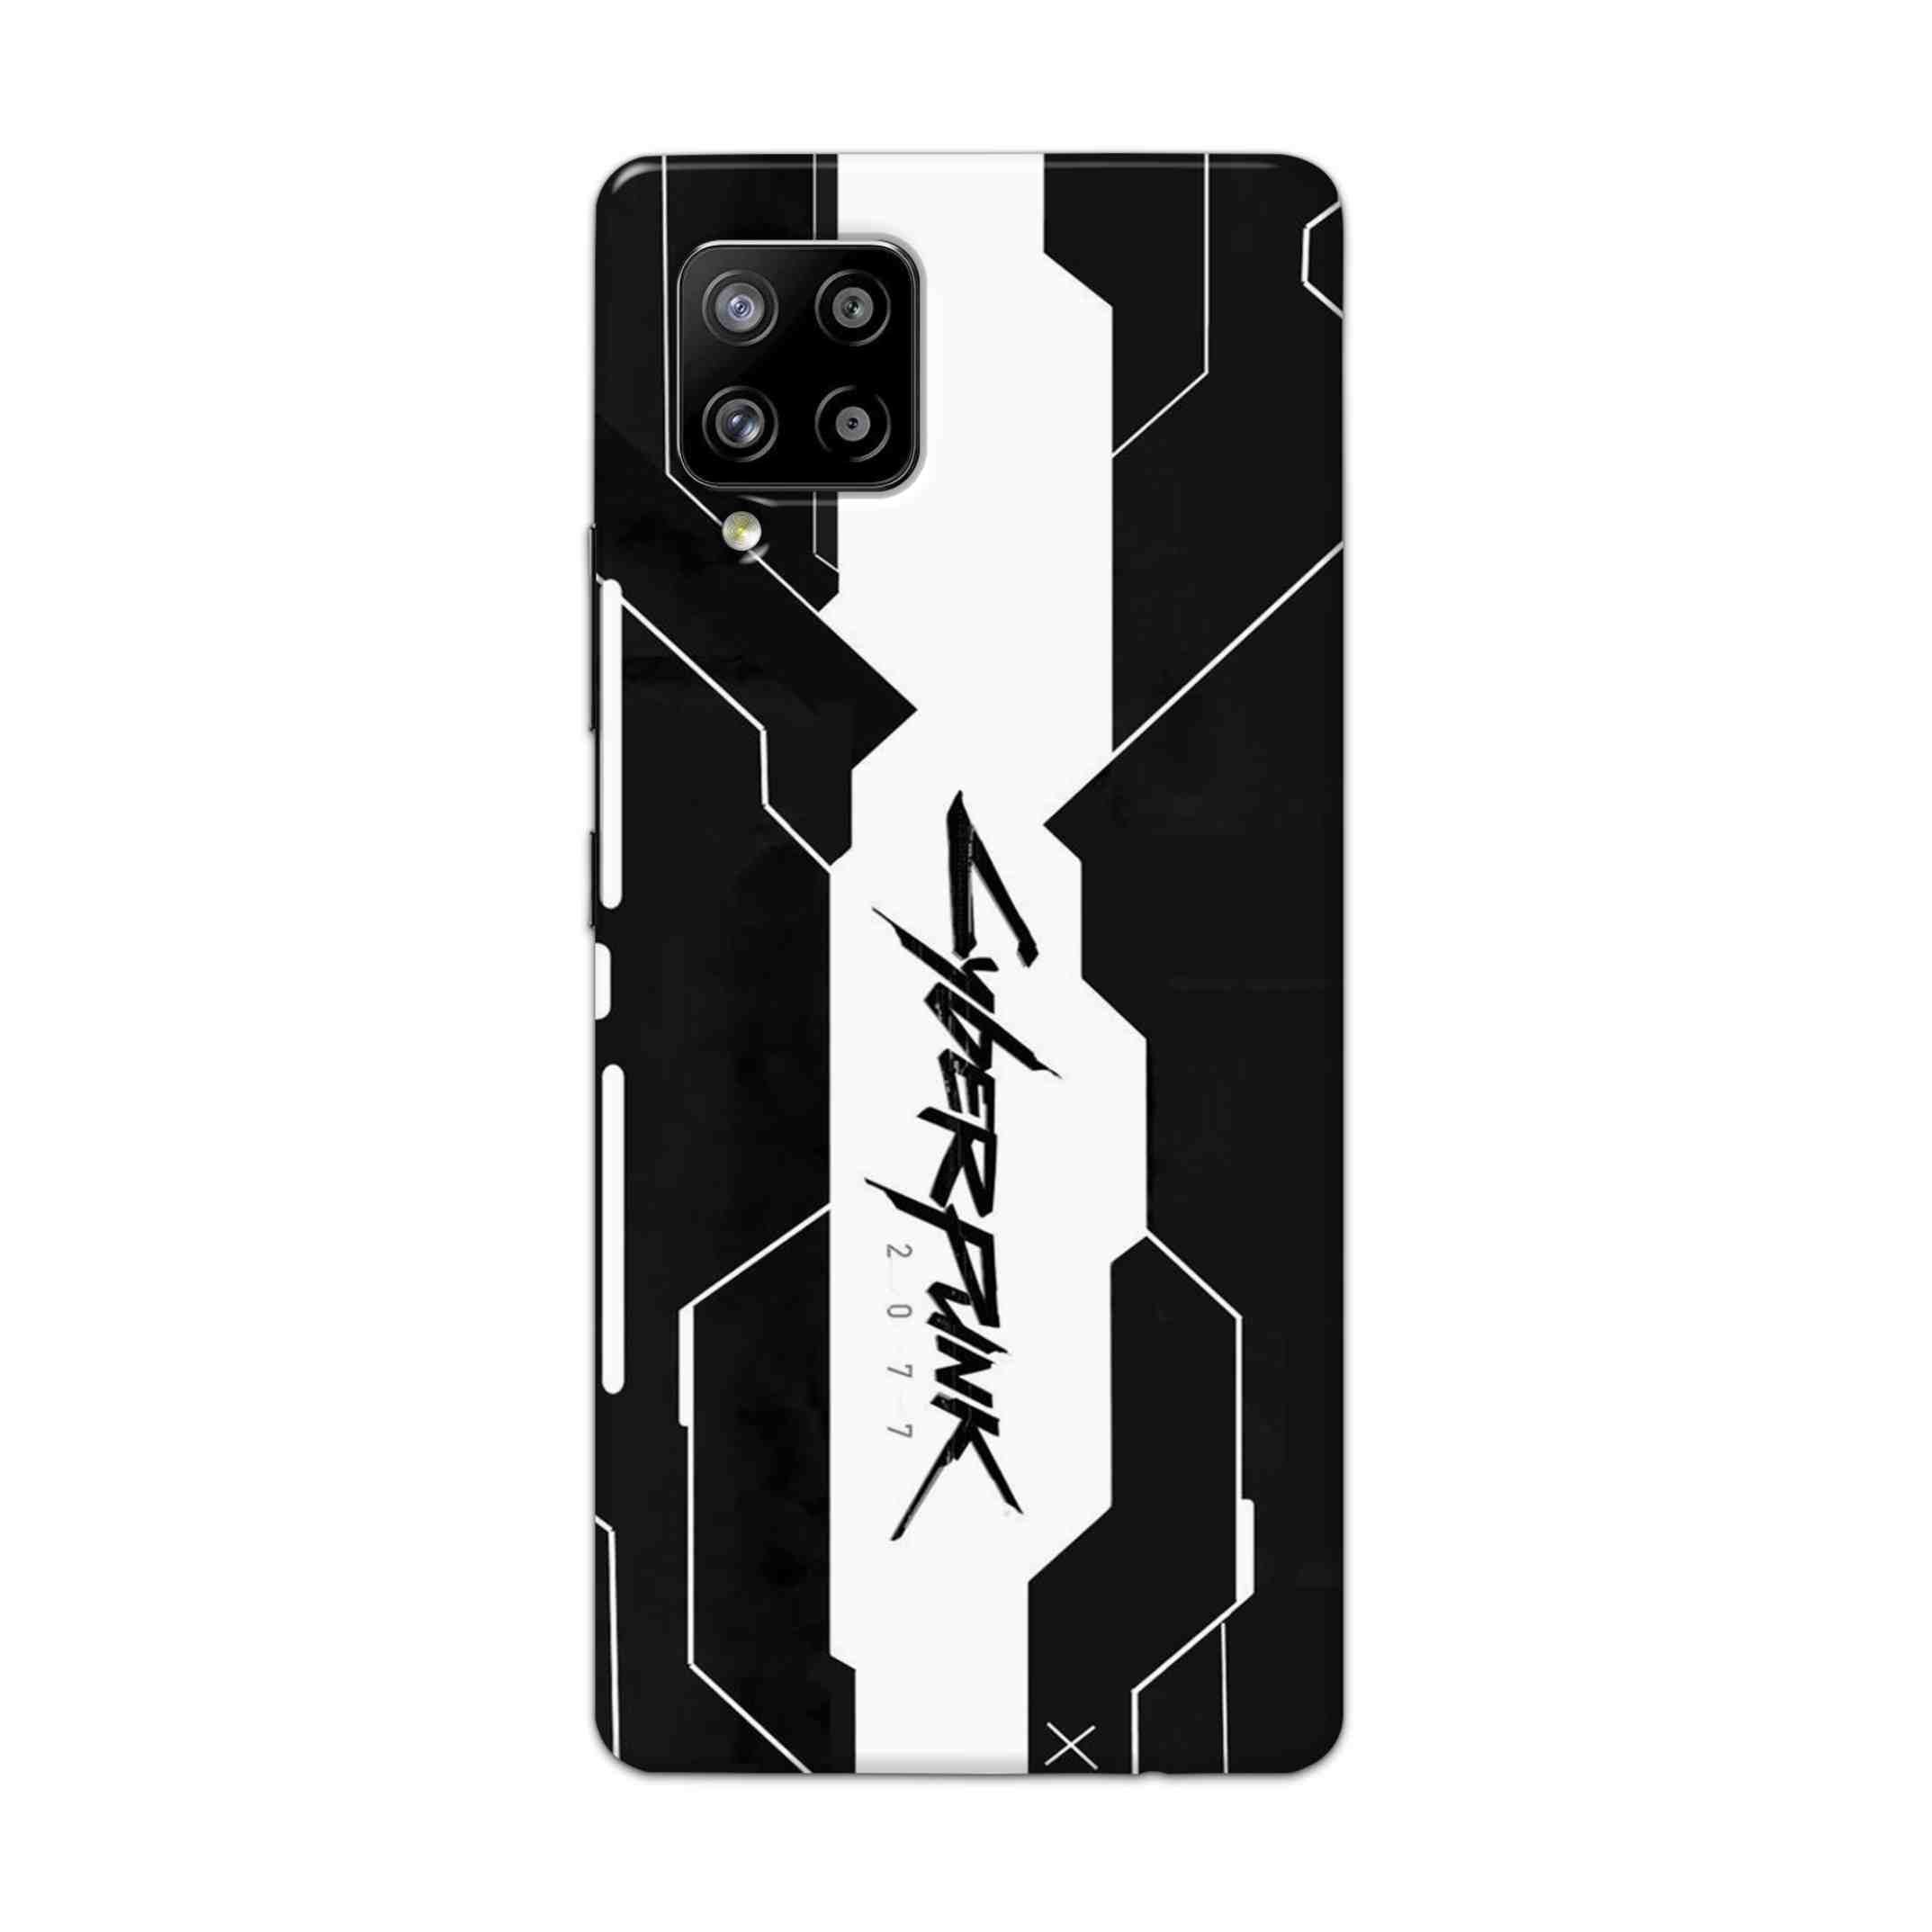 Buy Cyberpunk 2077 Art Hard Back Mobile Phone Case Cover For Samsung Galaxy M42 Online